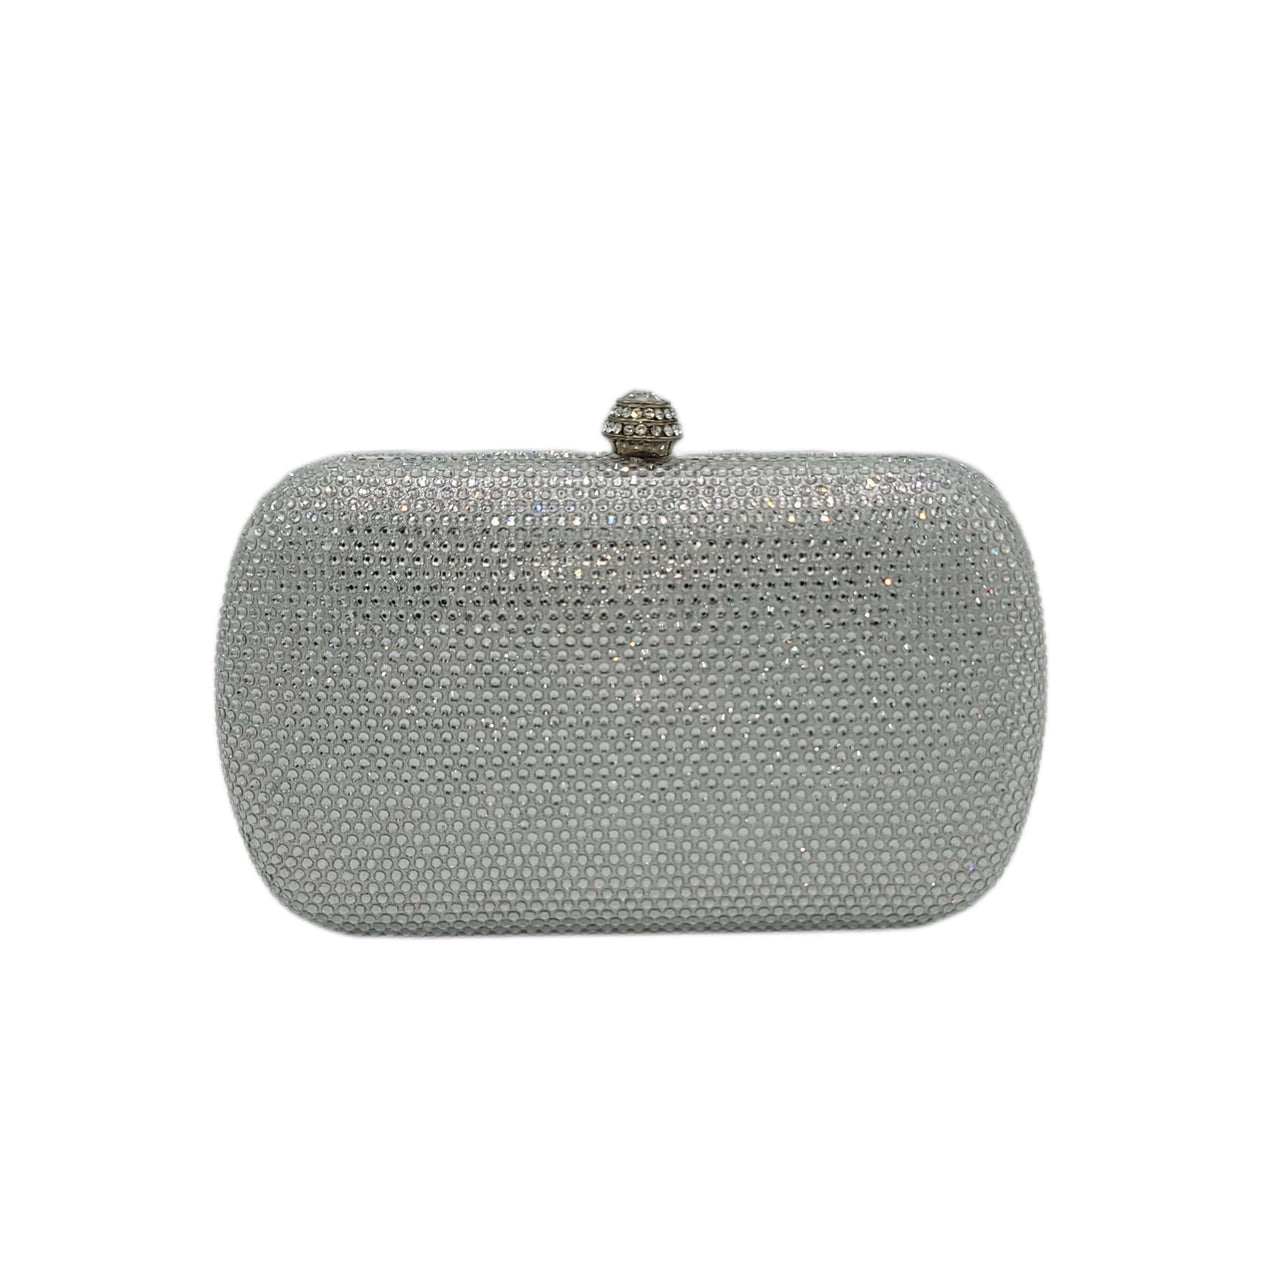 The Bag Couture Handbags, Wallets & Cases Stone Embellished Clutch 1 Silver